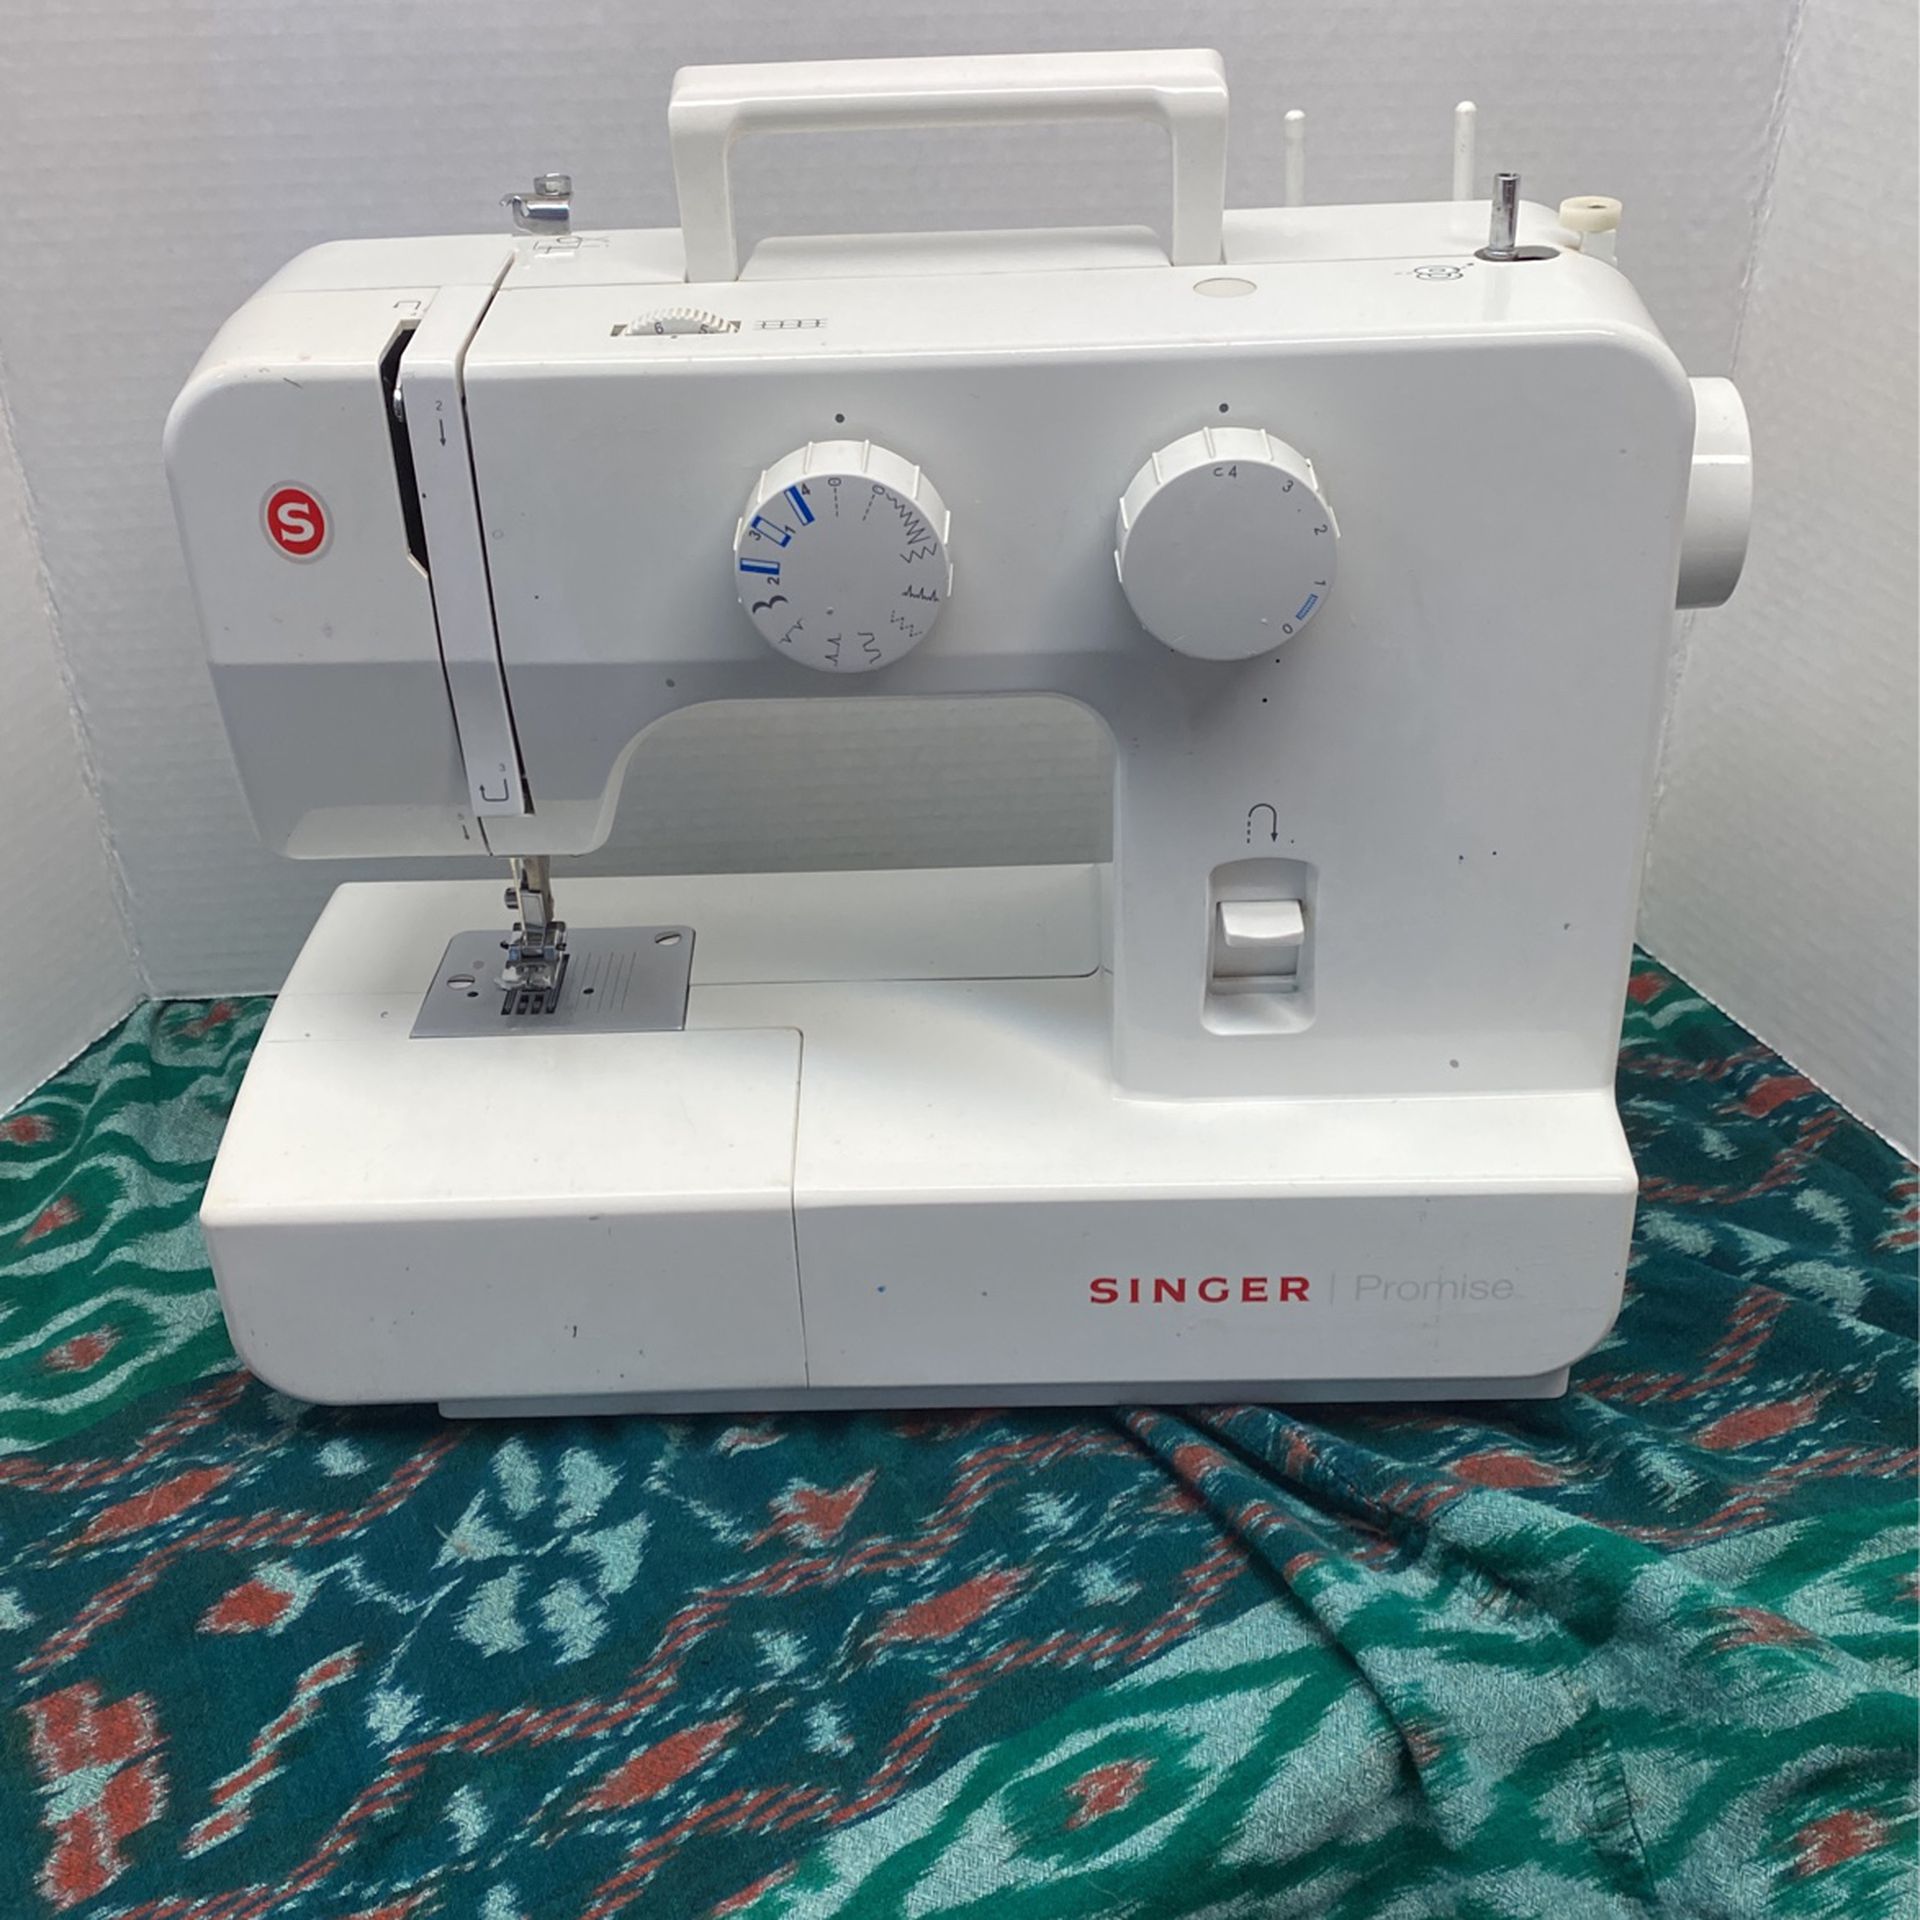 Singer Promise Sewing Machine 